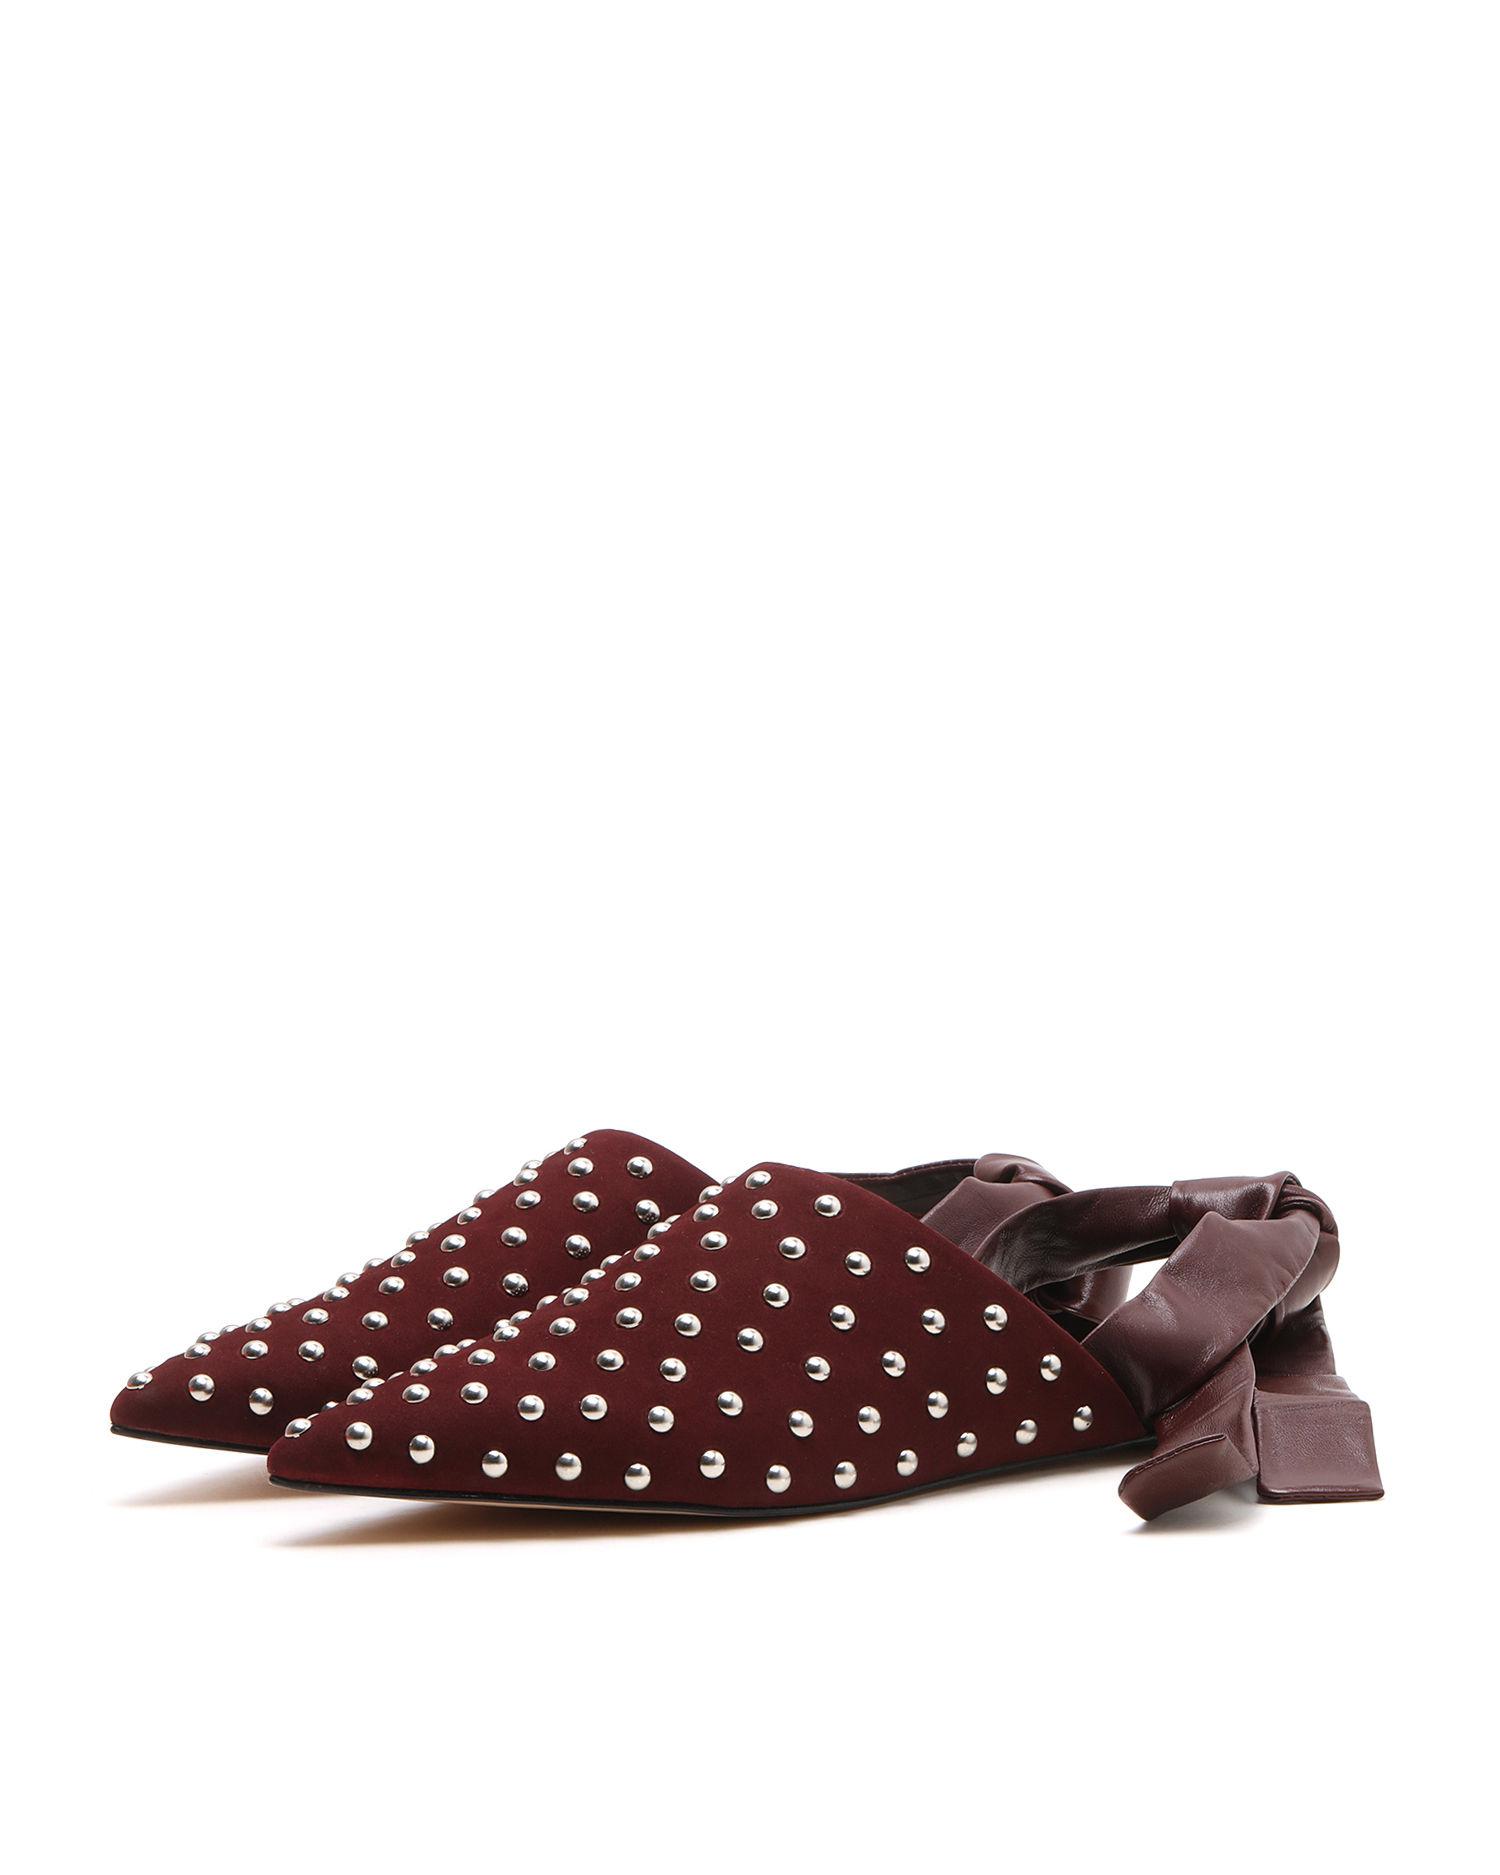 Laced up embellished flats by CARRANO